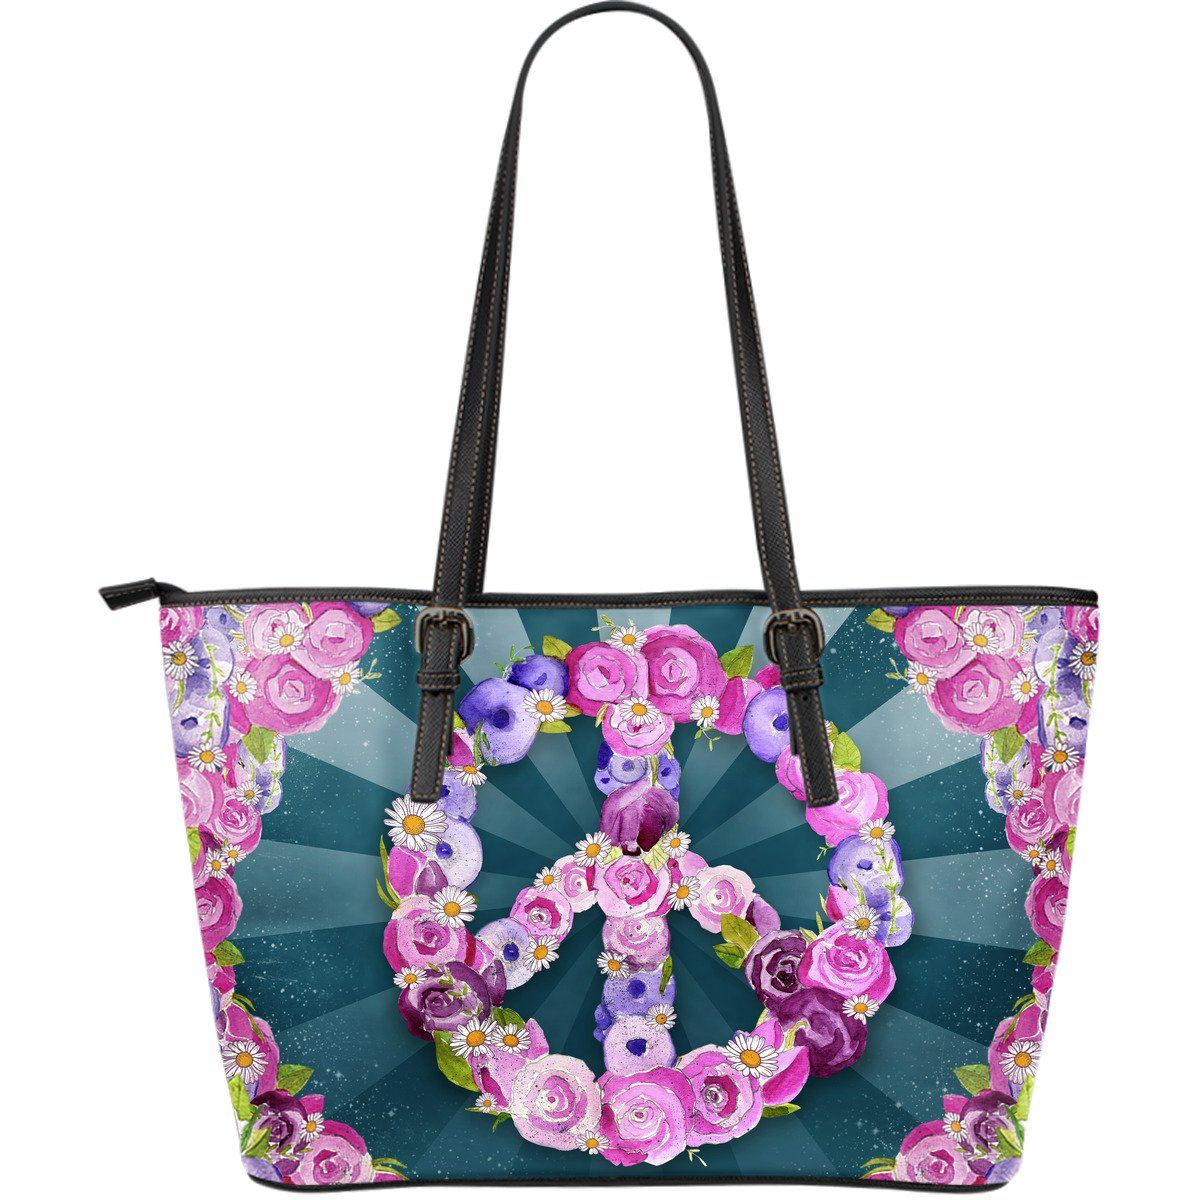 Peace n' Love - Big artificial leather bag.